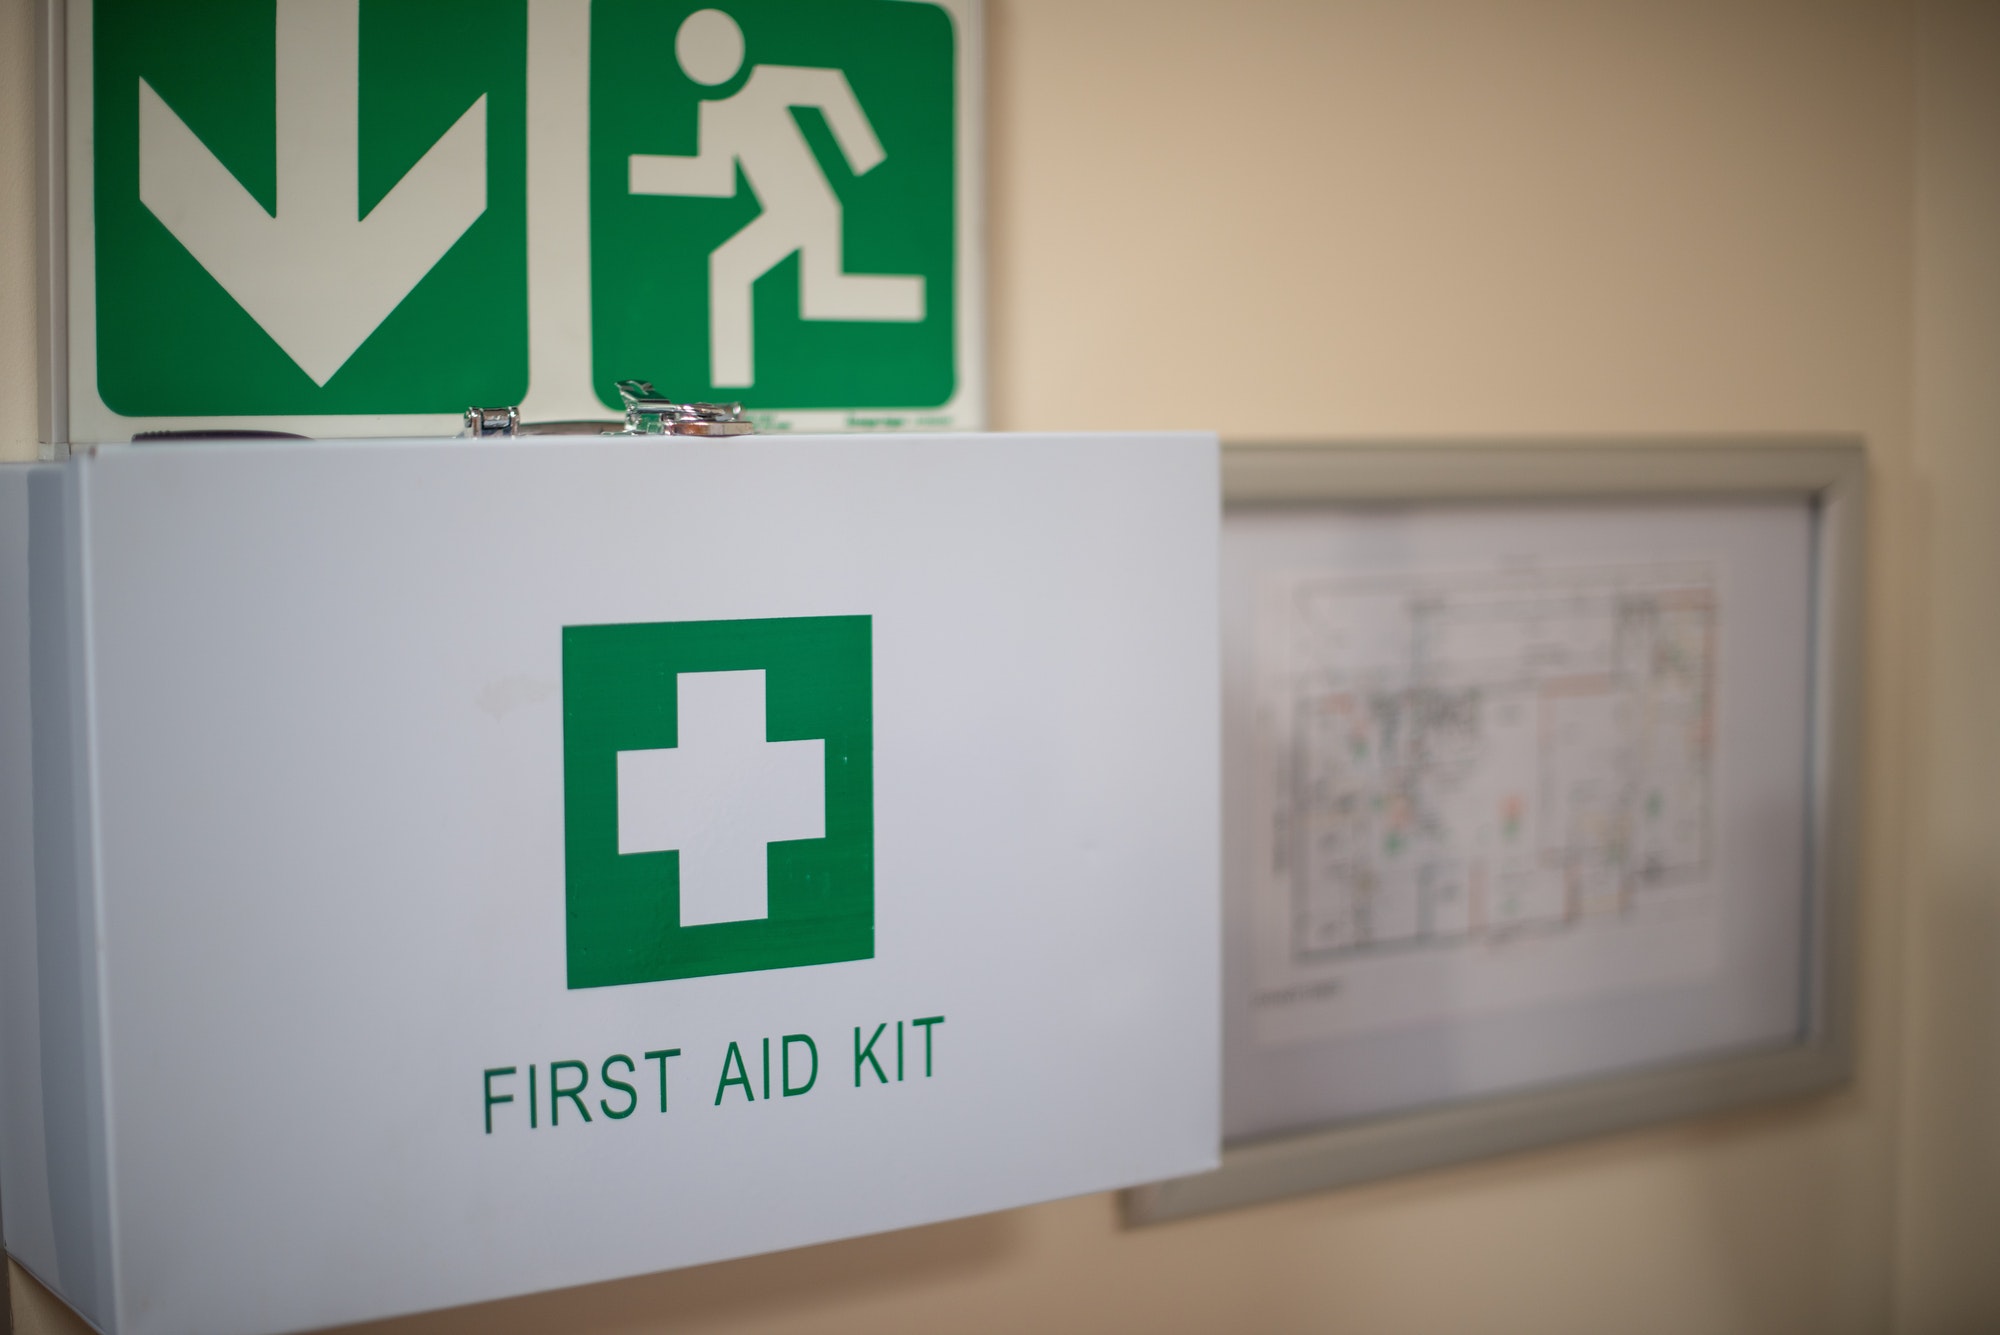 Guidelines To Responding to First Aid Cases